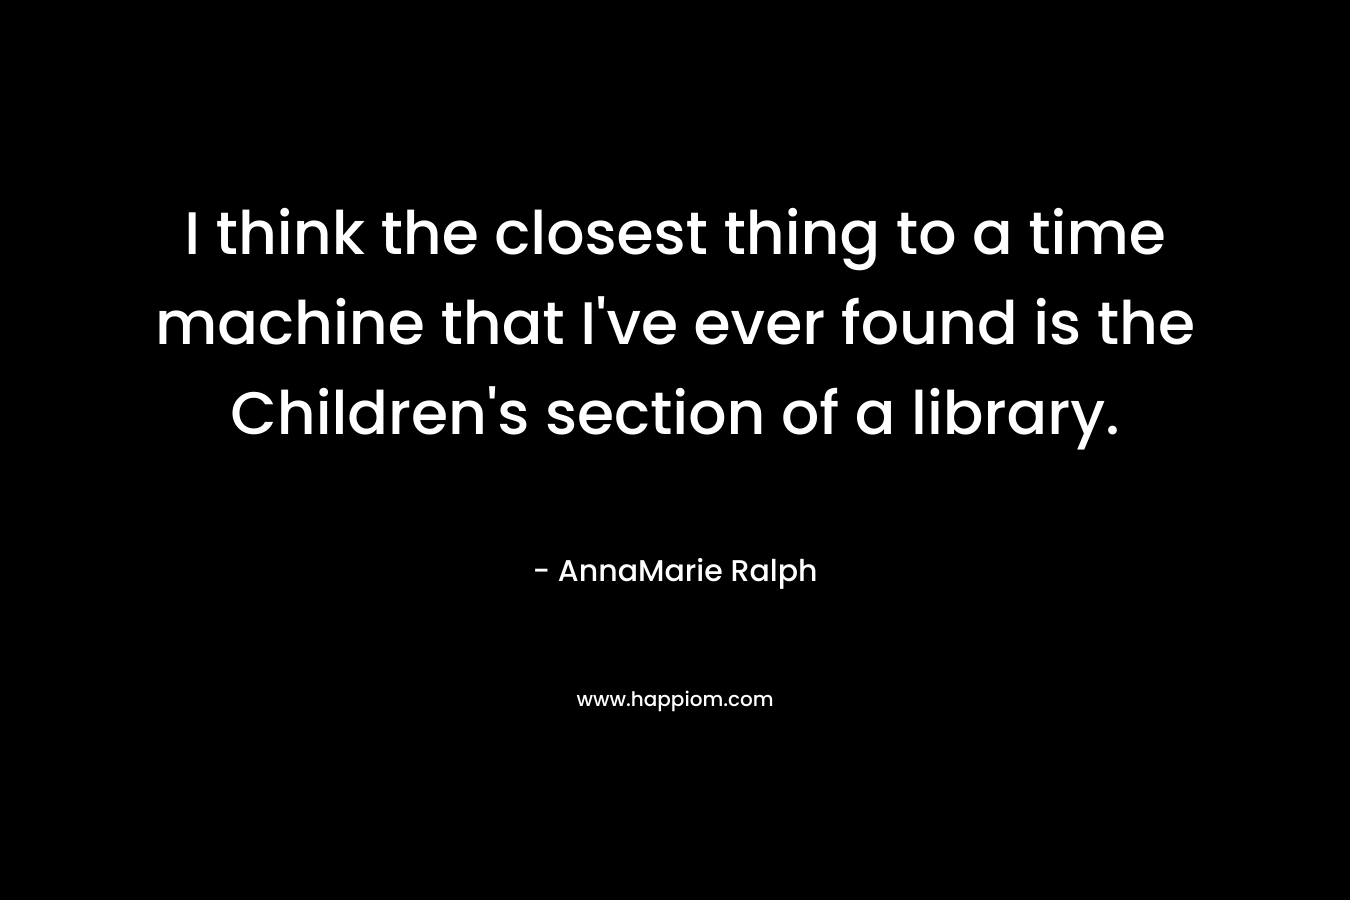 I think the closest thing to a time machine that I’ve ever found is the Children’s section of a library. – AnnaMarie Ralph